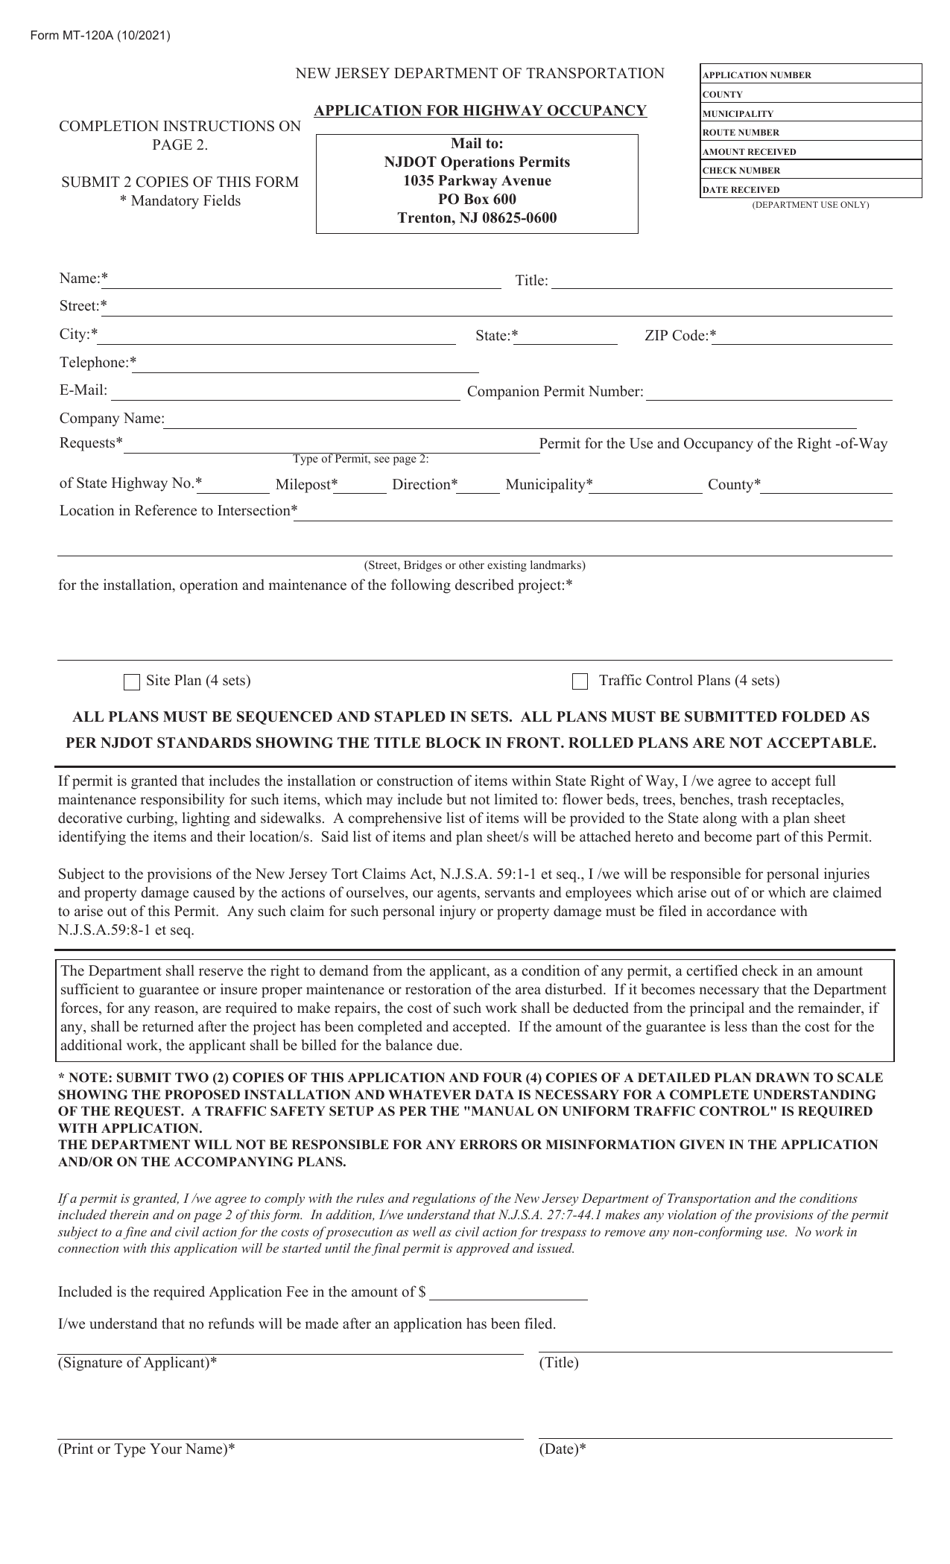 Form MT-120A Application for Highway Occupancy - New Jersey, Page 1